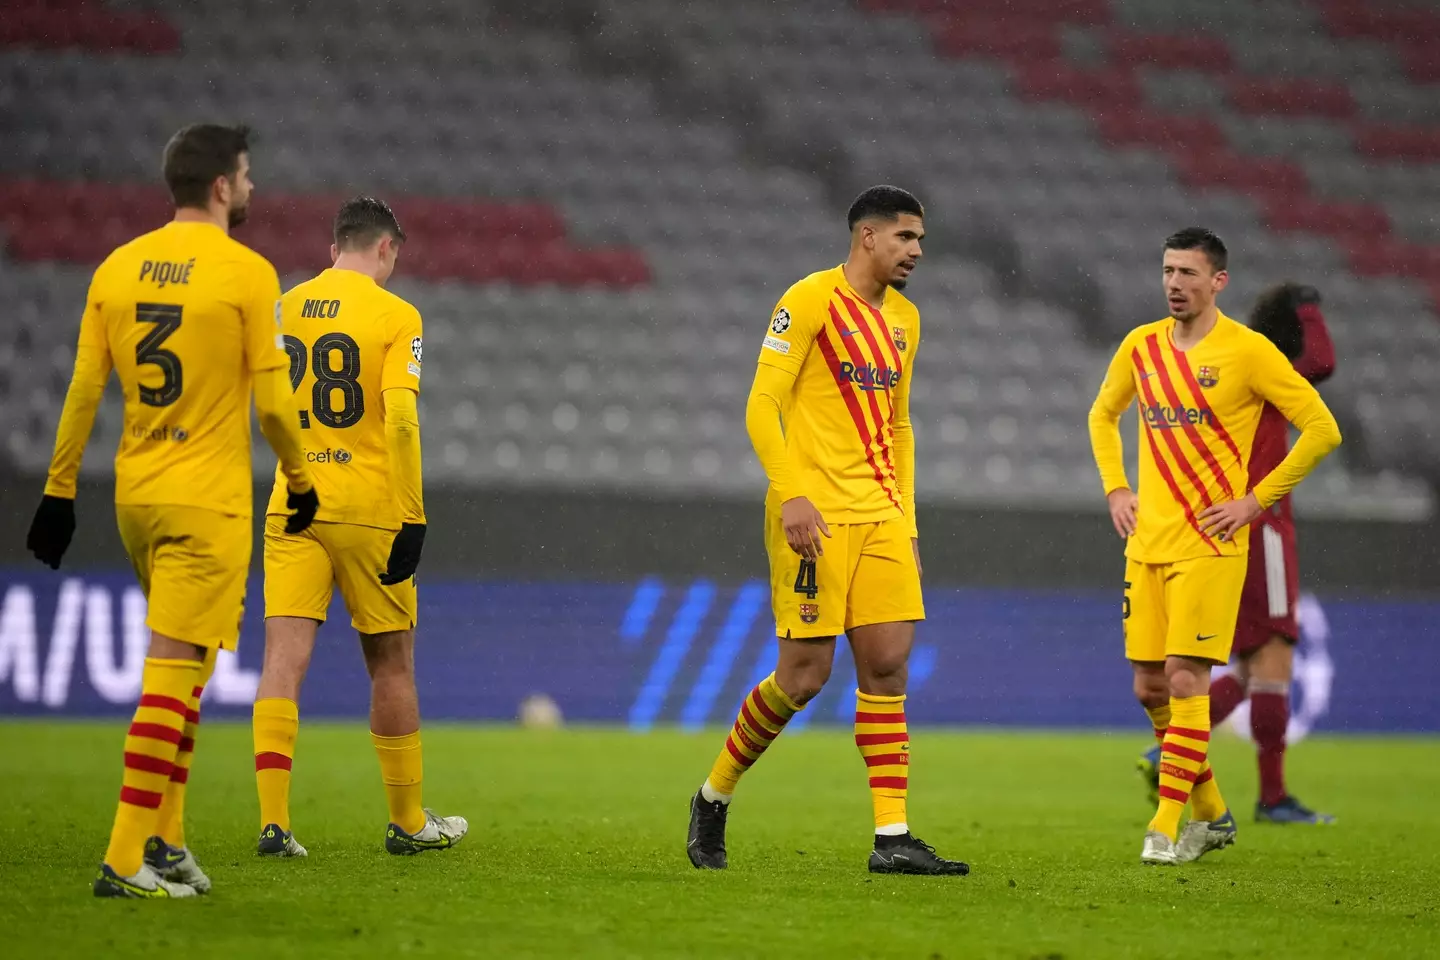 Barcelona players look downcast after the match. Image: PA Images